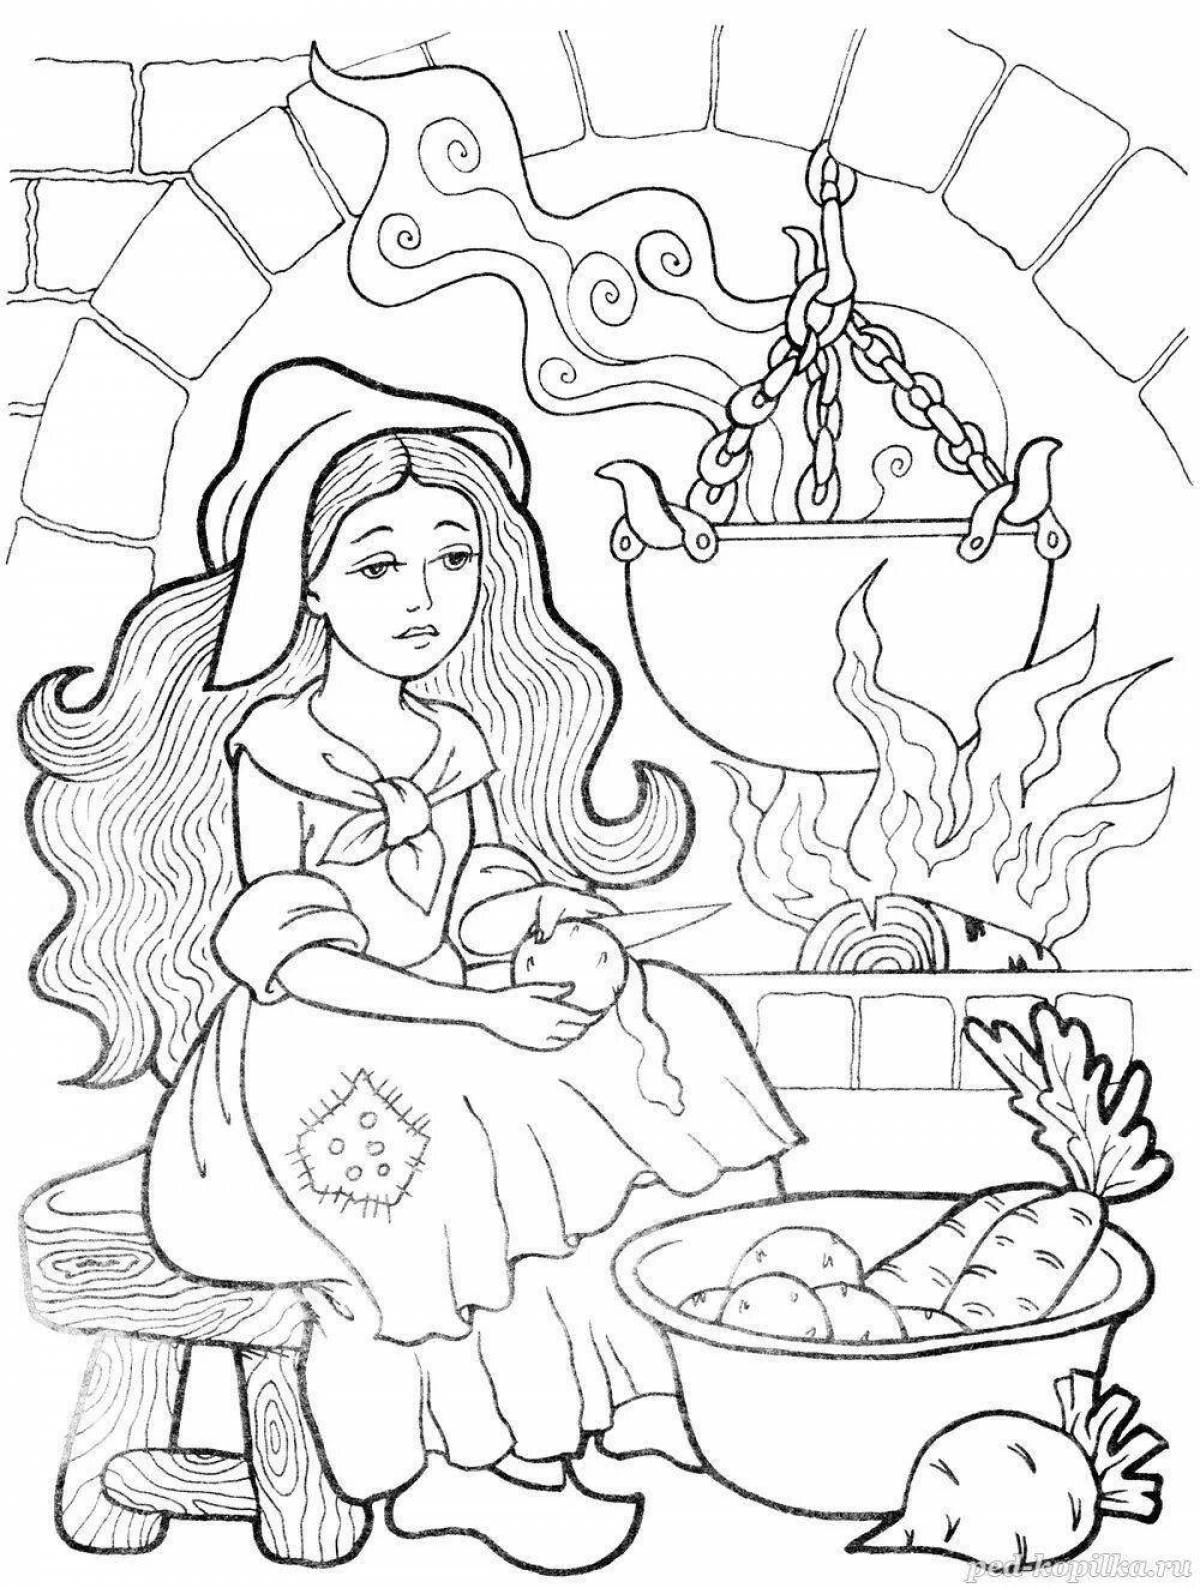 Exquisite coloring book from perrault's tales